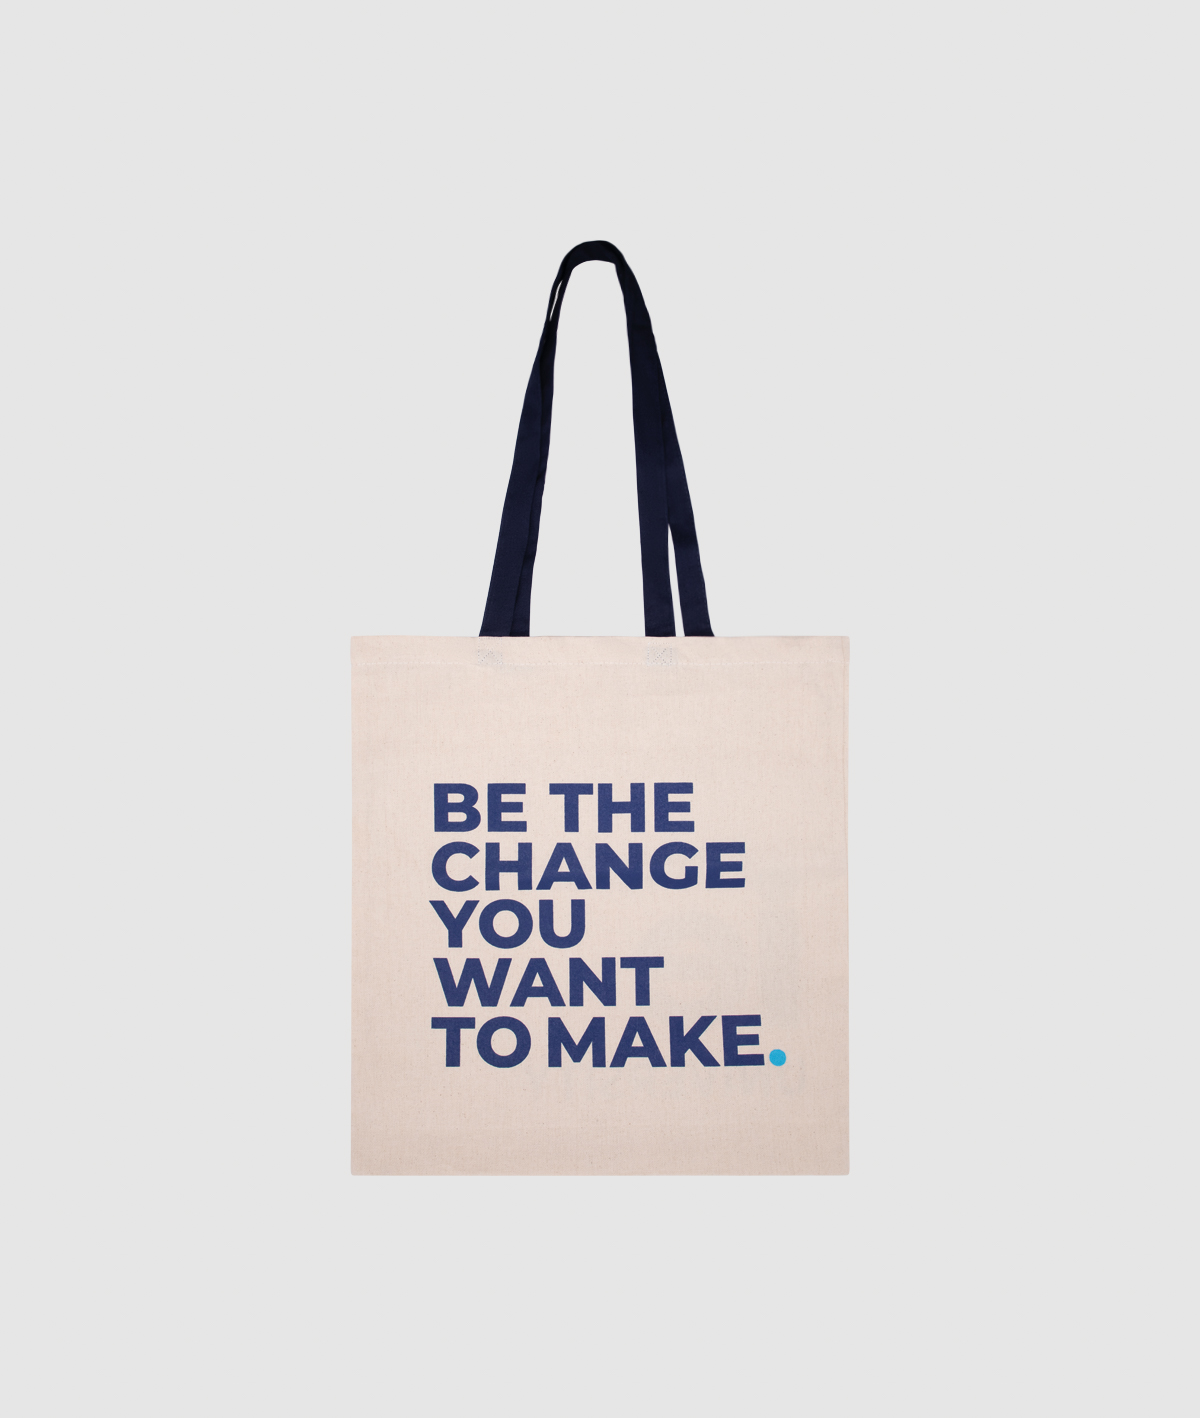 Tote bag "Be the change you want to make". natural colour back